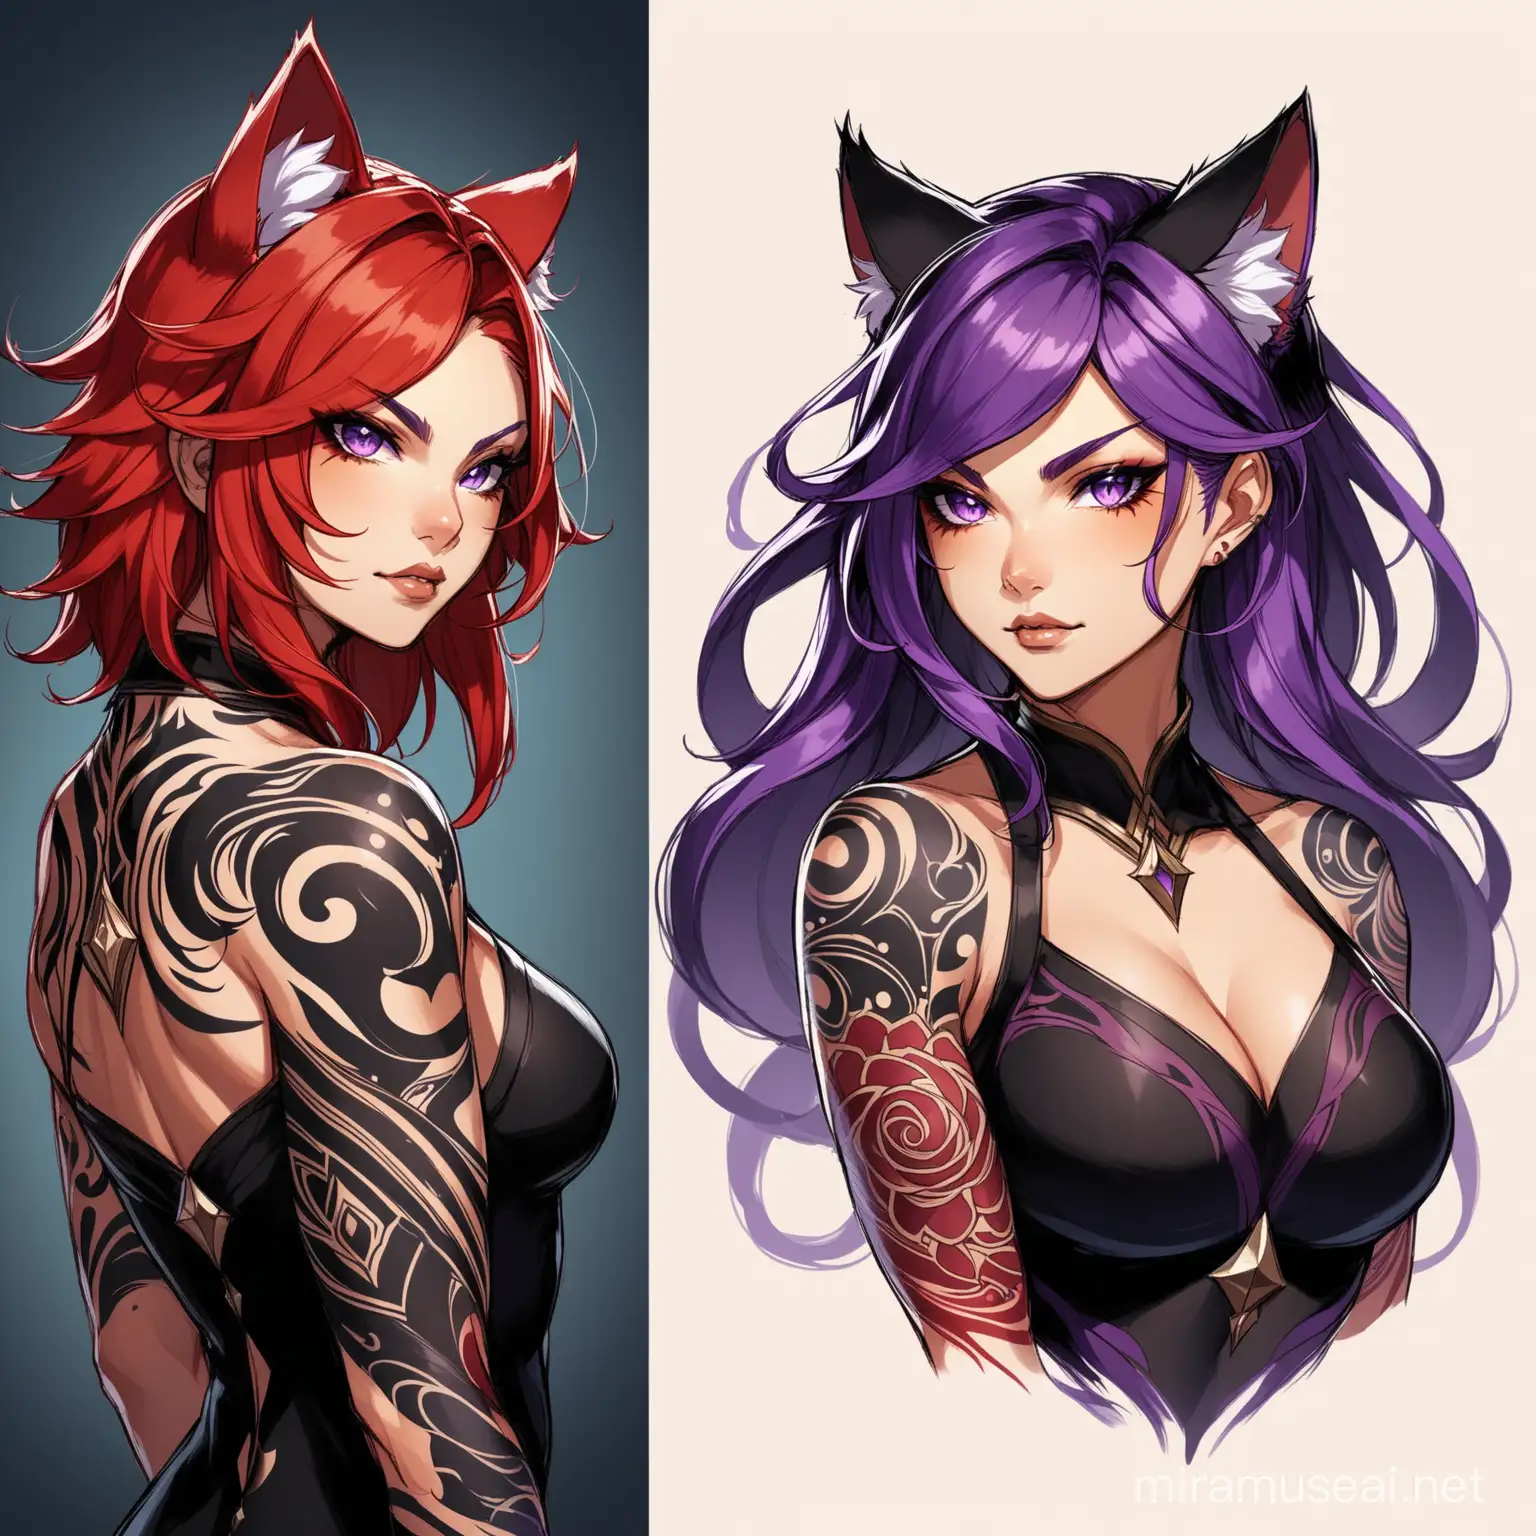 draw a character you'd see in genshin impact with red cat ears, long red and purple hair, mature, black swirl tattoos on skin, fierce